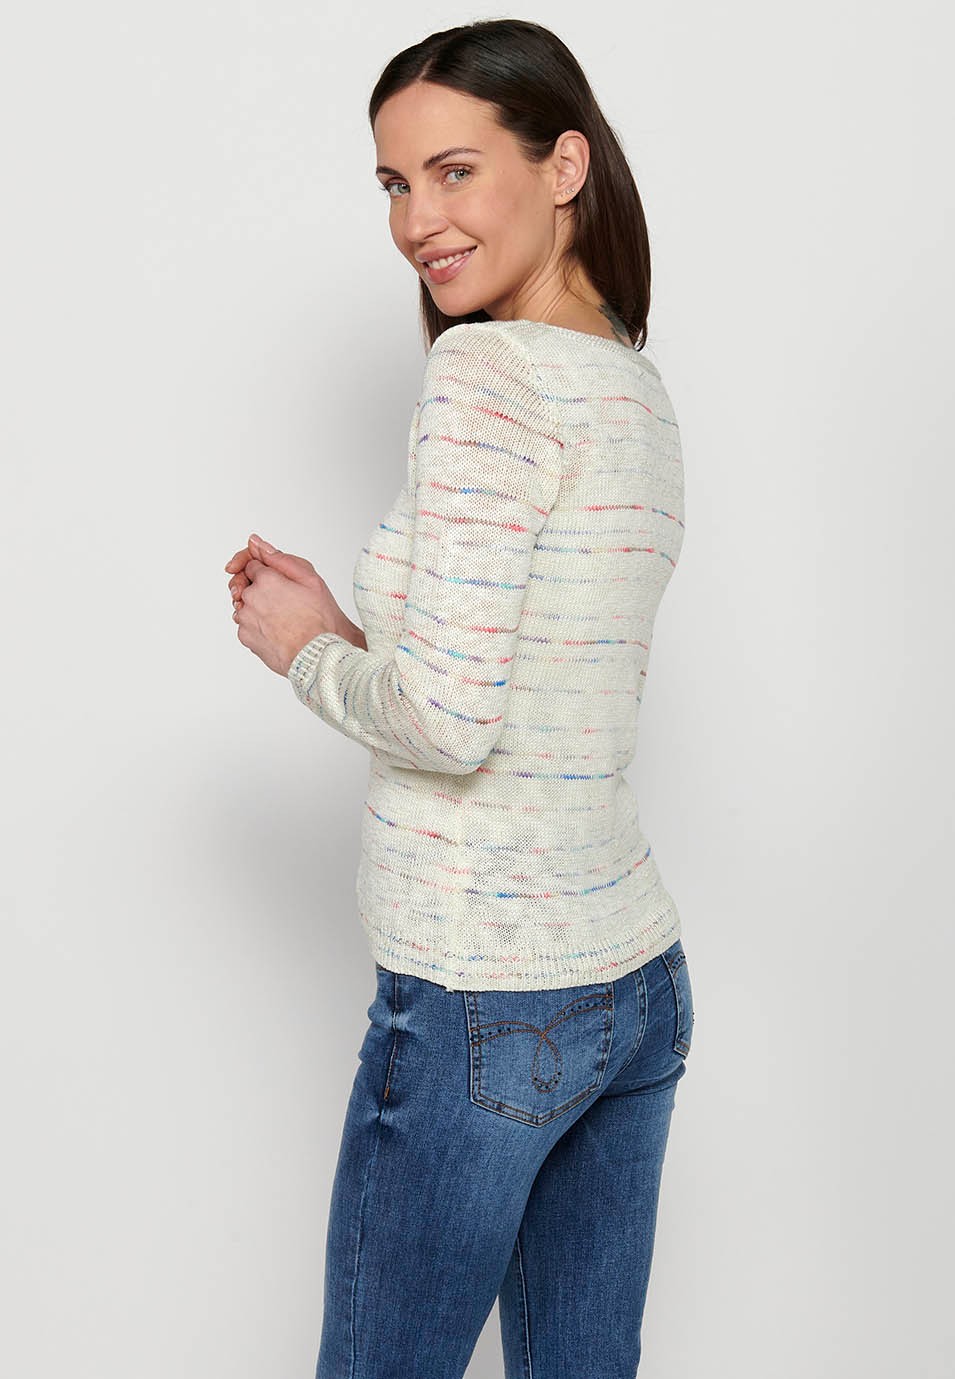 Long-sleeved, round-neck, off-white heather sweater for women